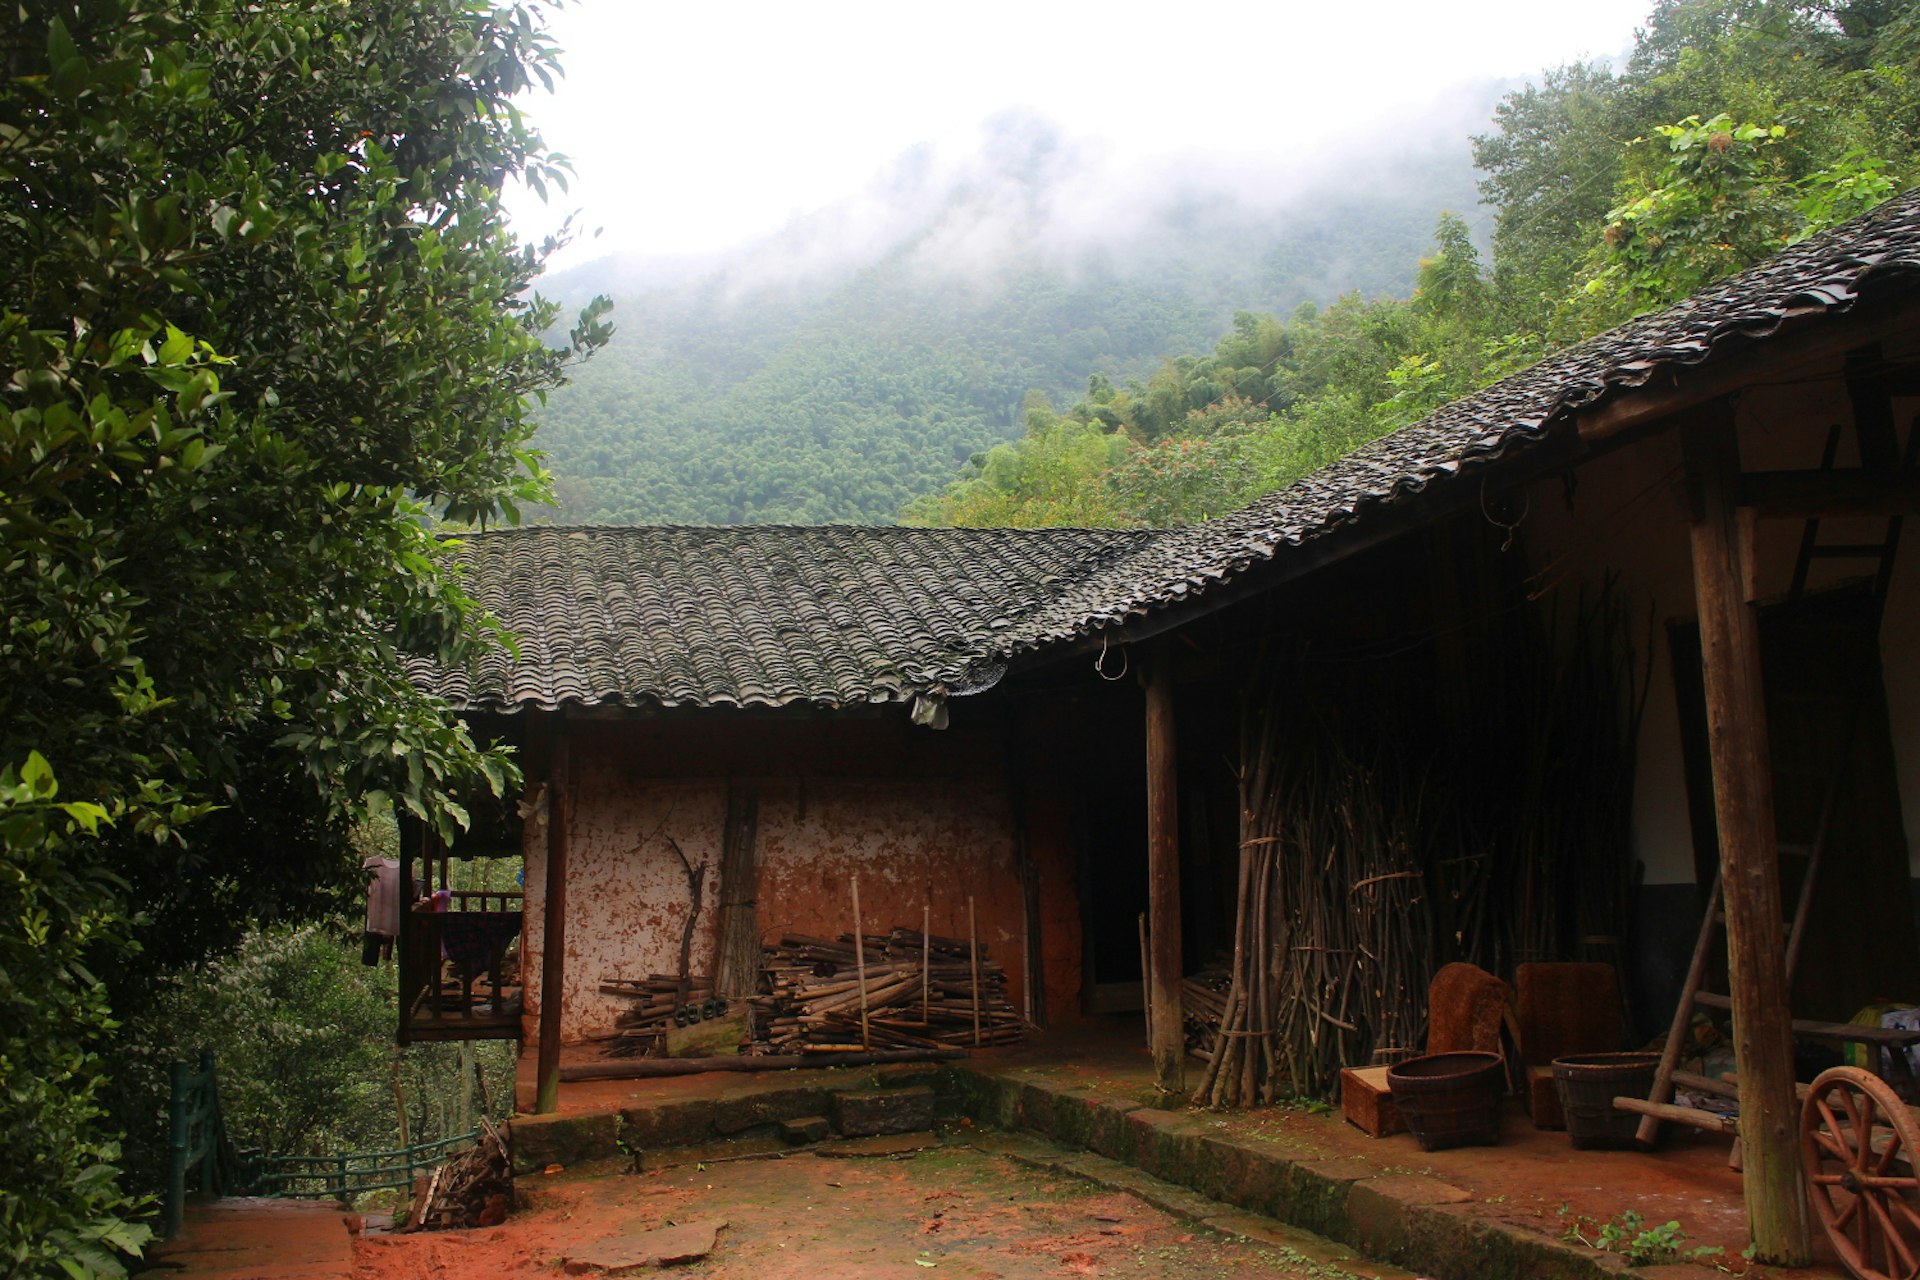 Ancient farmhouses around Chishui recall simpler times in China's history. Image by Thomas Bird / Lonely Planet